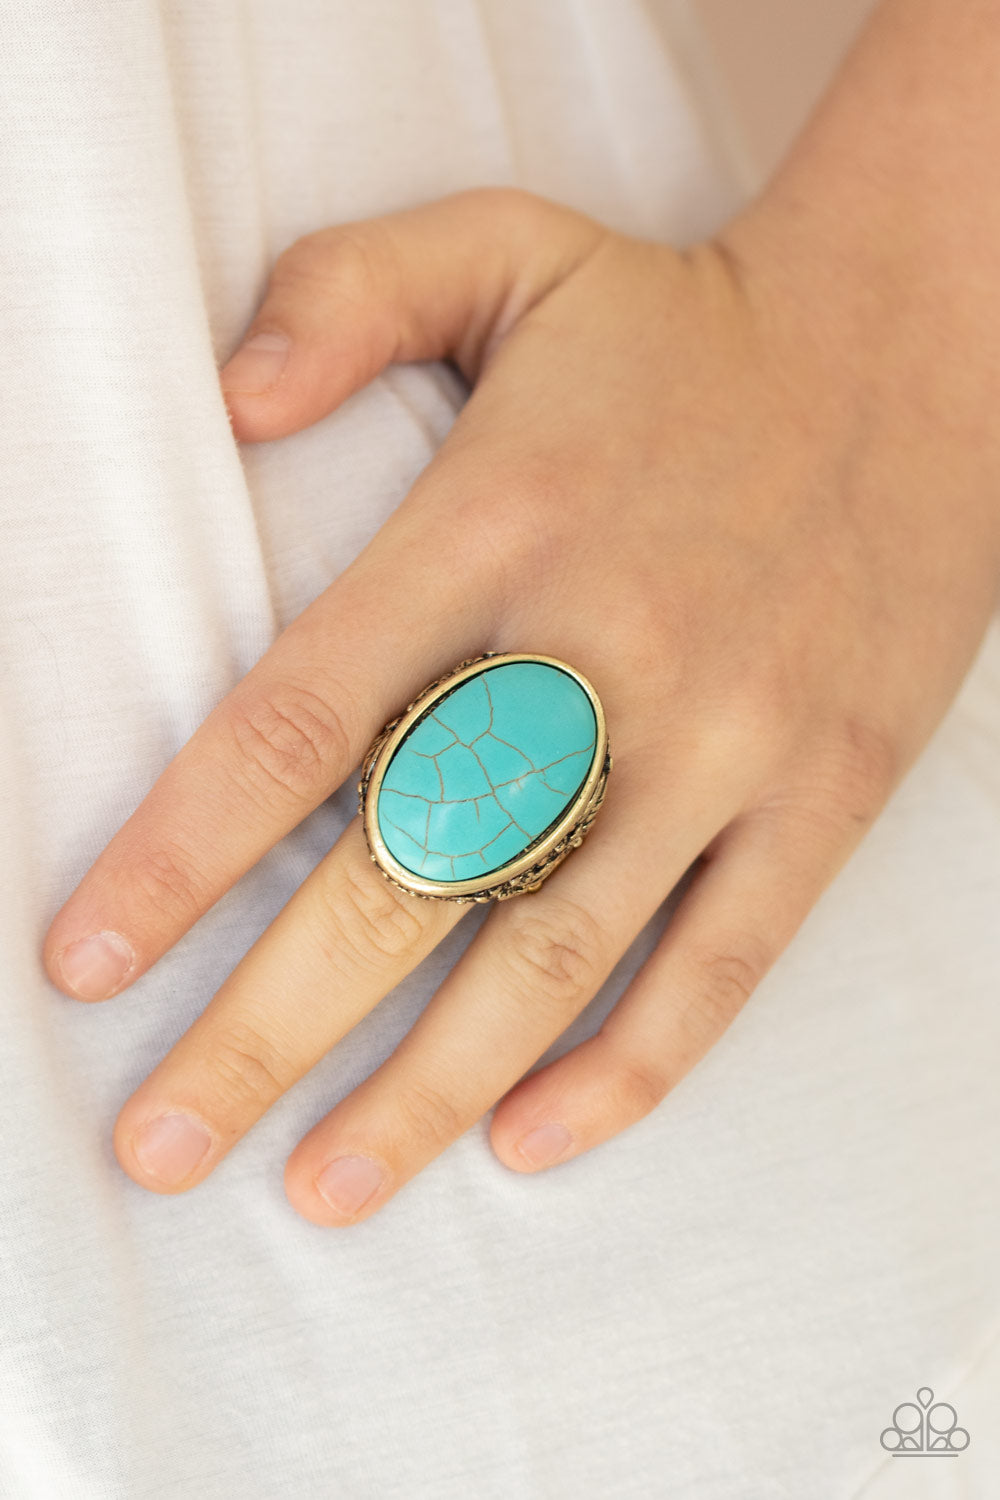 Paparazzi Jewelry & Accessories - Stonehenge Garden - Brass Ring. Bling By Titia Boutique